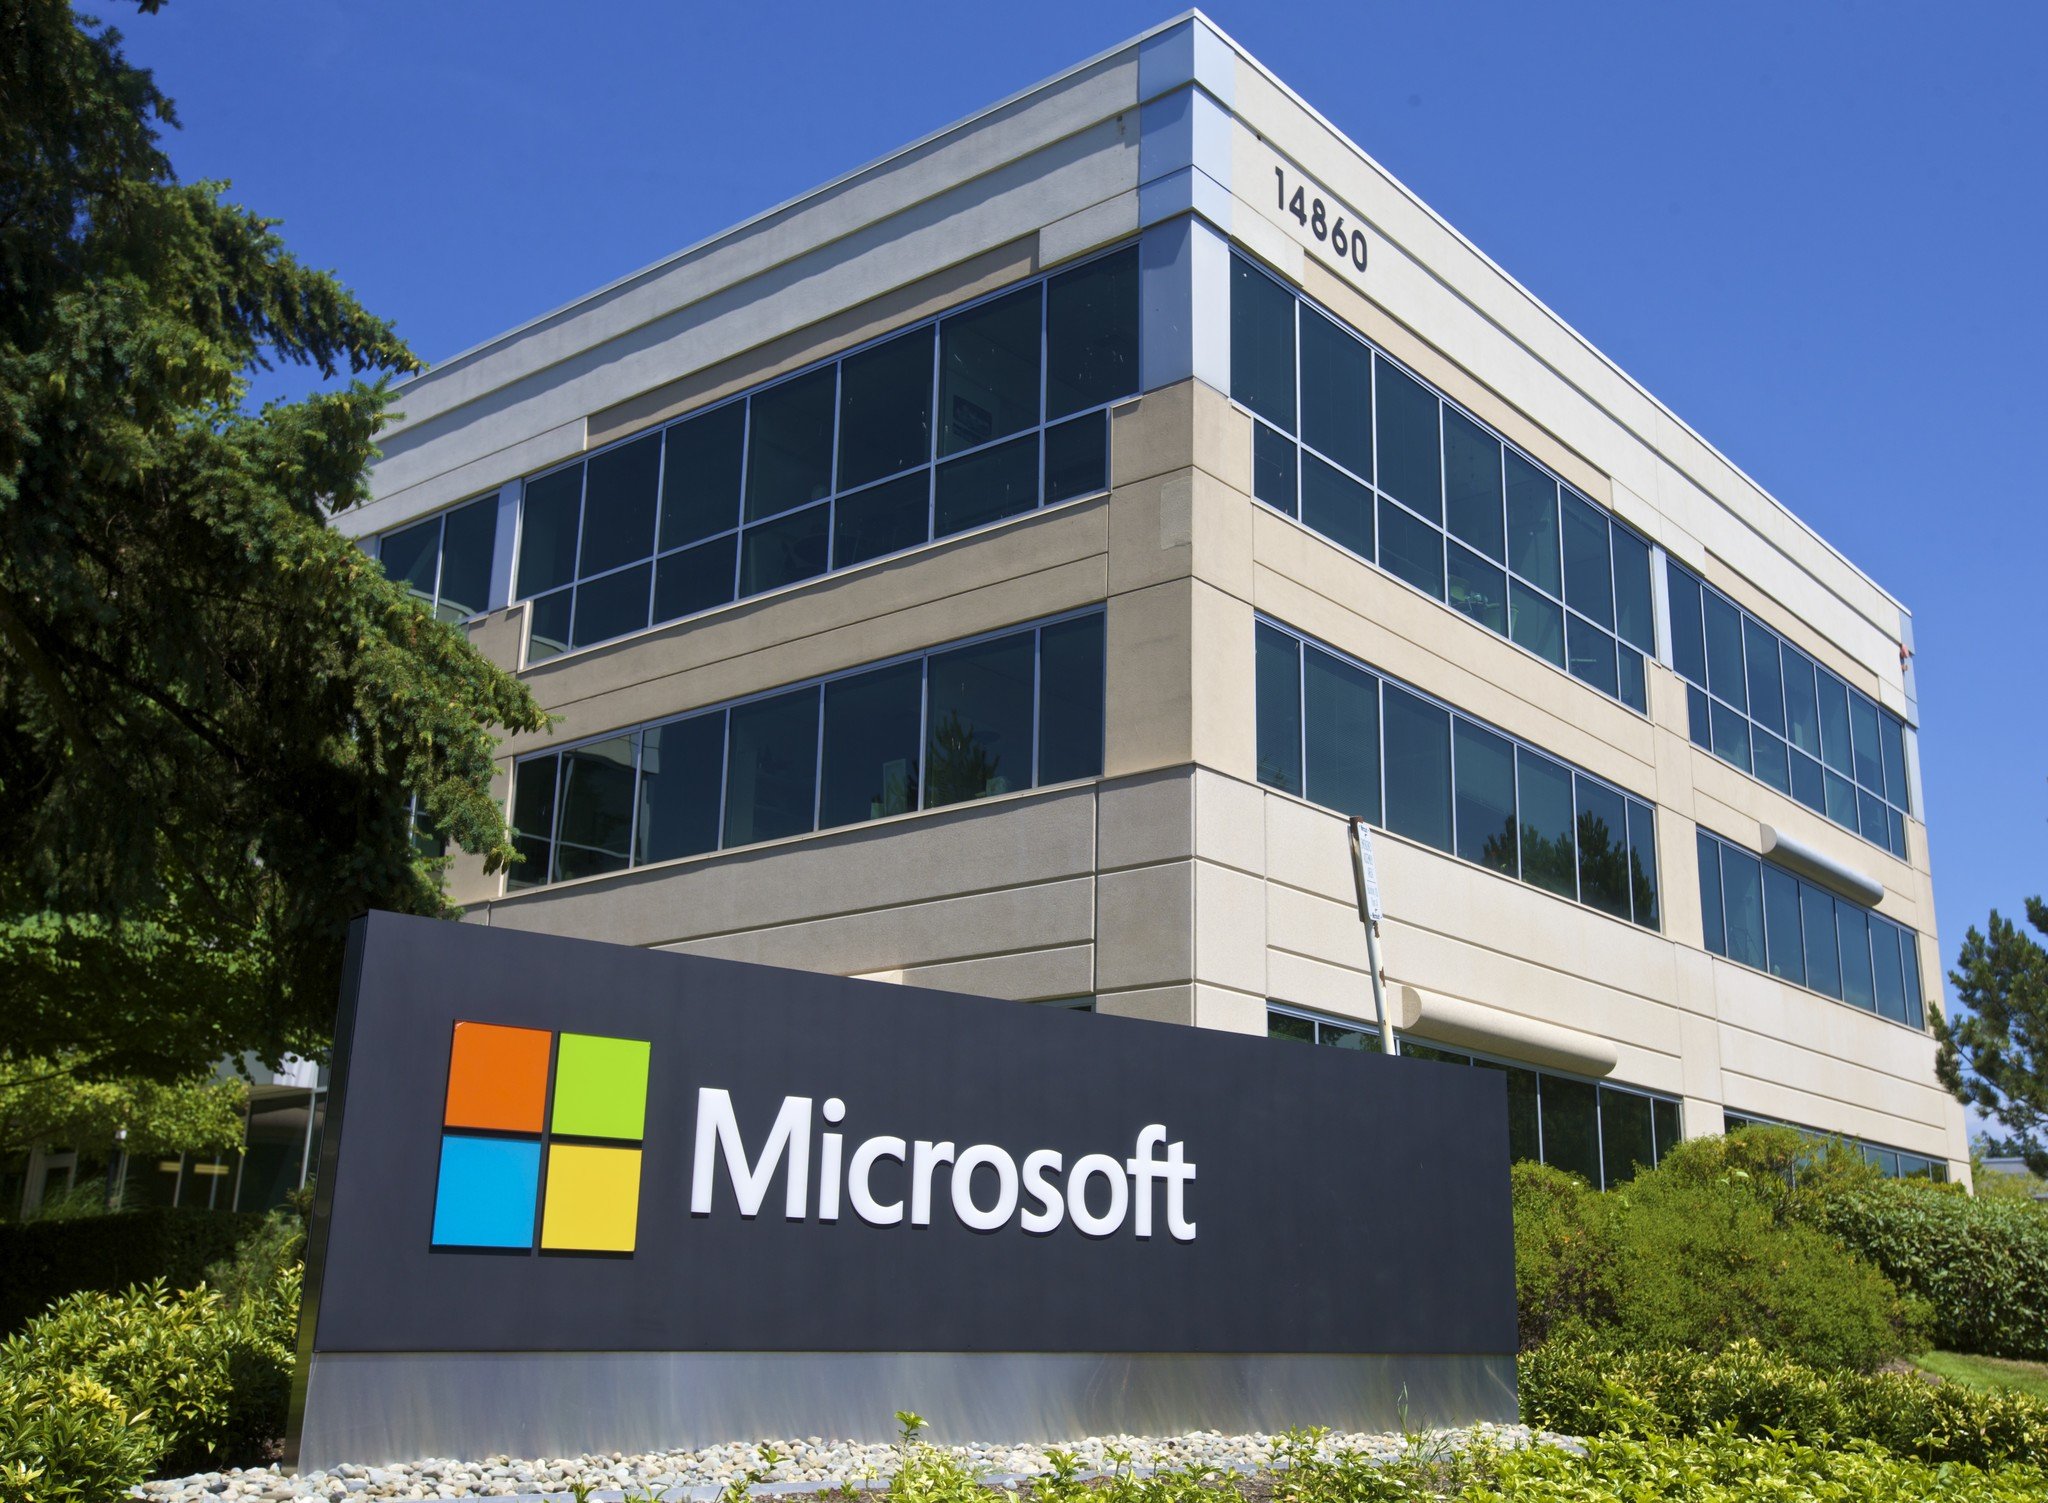 Following Kaspersky complaint, Microsoft outlines approach to antivirus coverage